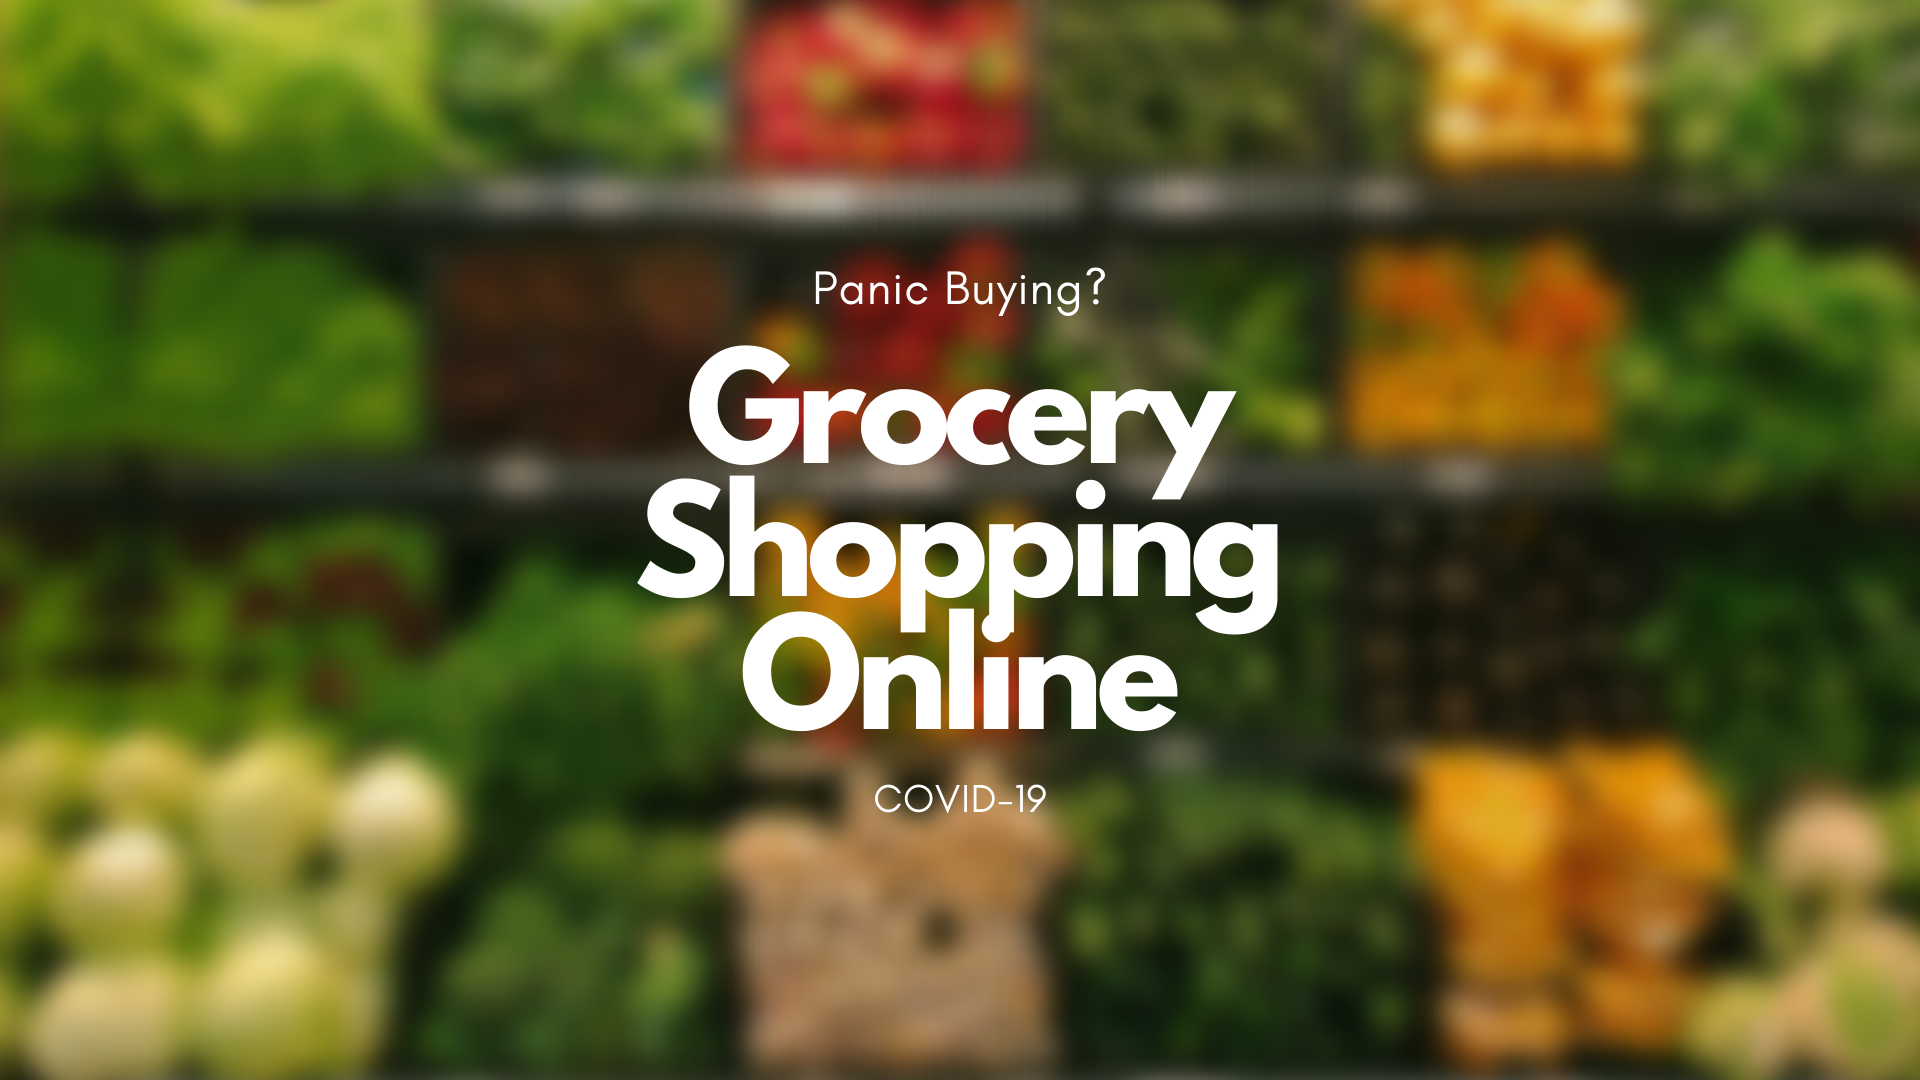 COVID-19: Panic Buying? Here's A List Of Online Grocery Shopping Stores